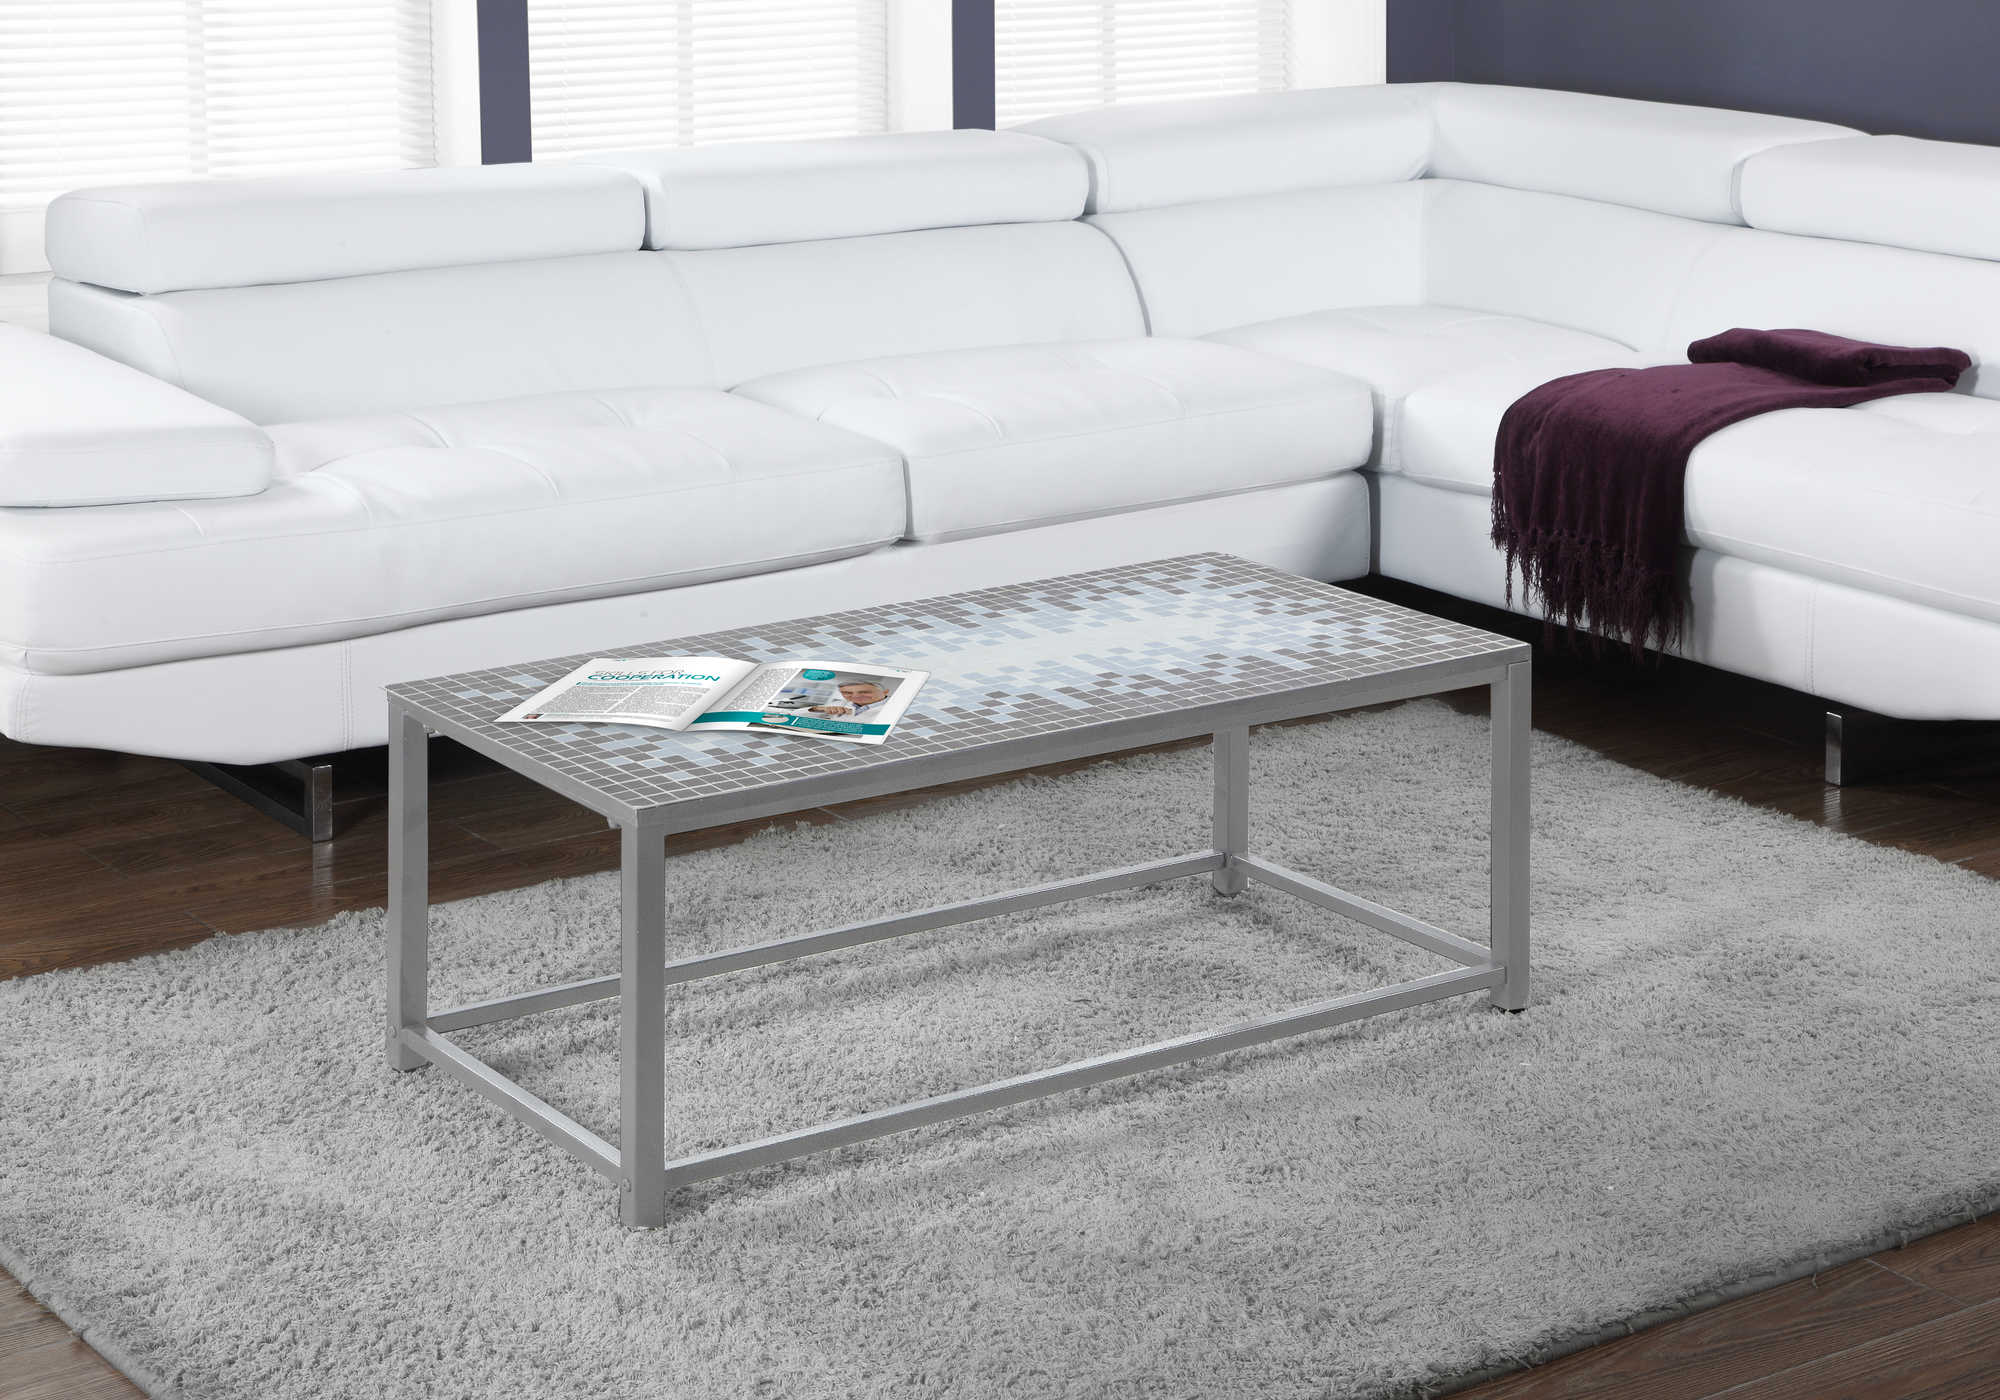 COFFEE TABLE - GREY / BLUE TILE TOP / HAMMERED SILVER 